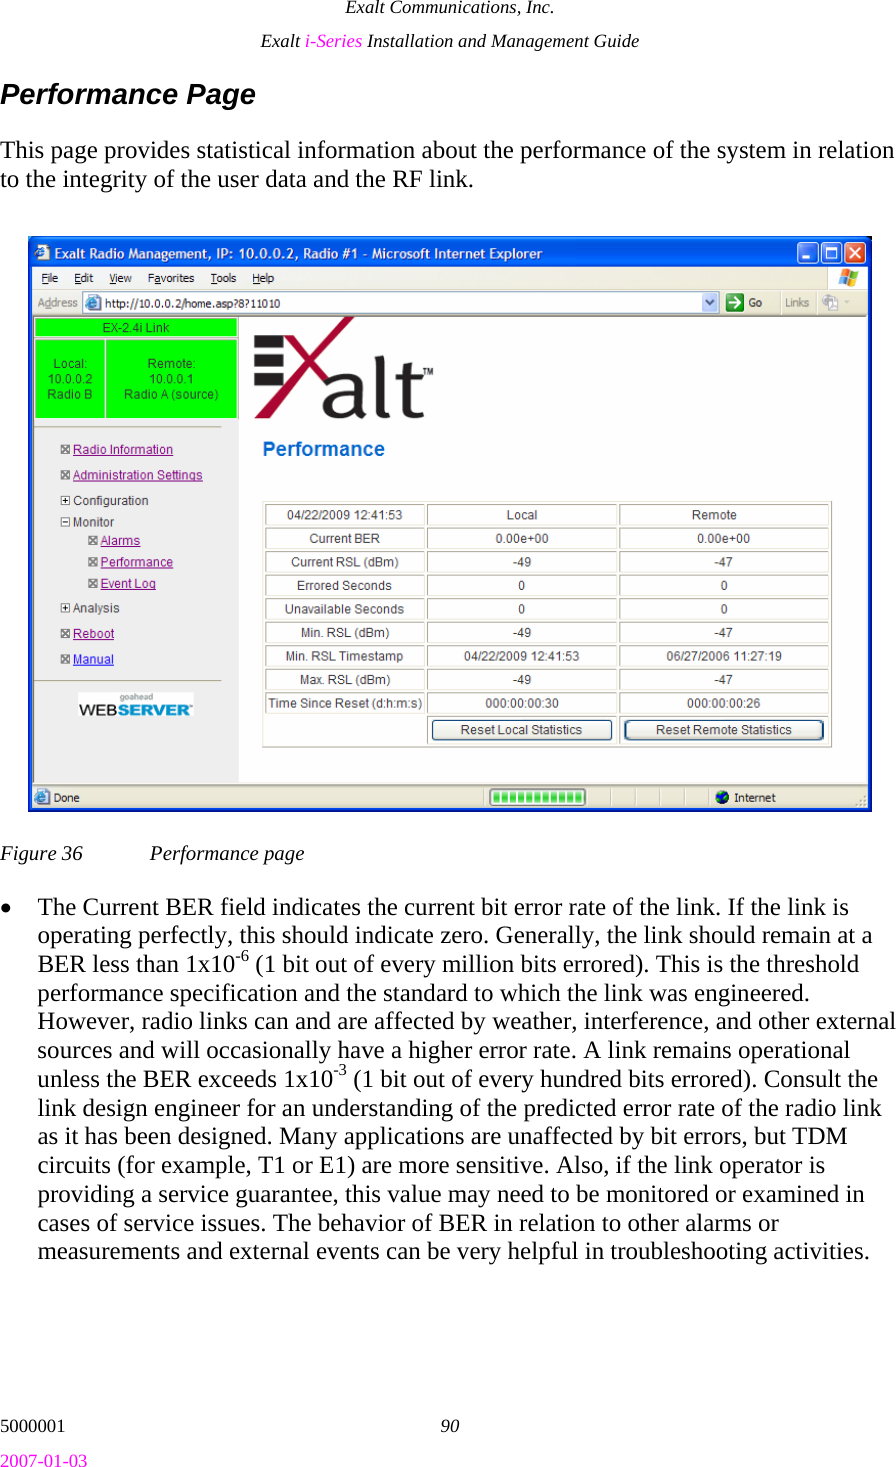 Exalt Communications, Inc. Exalt i-Series Installation and Management Guide 5000001  90 2007-01-03 Performance Page This page provides statistical information about the performance of the system in relation to the integrity of the user data and the RF link.  Figure 36  Performance page • The Current BER field indicates the current bit error rate of the link. If the link is operating perfectly, this should indicate zero. Generally, the link should remain at a BER less than 1x10-6 (1 bit out of every million bits errored). This is the threshold performance specification and the standard to which the link was engineered. However, radio links can and are affected by weather, interference, and other external sources and will occasionally have a higher error rate. A link remains operational unless the BER exceeds 1x10-3 (1 bit out of every hundred bits errored). Consult the link design engineer for an understanding of the predicted error rate of the radio link as it has been designed. Many applications are unaffected by bit errors, but TDM circuits (for example, T1 or E1) are more sensitive. Also, if the link operator is providing a service guarantee, this value may need to be monitored or examined in cases of service issues. The behavior of BER in relation to other alarms or measurements and external events can be very helpful in troubleshooting activities. 